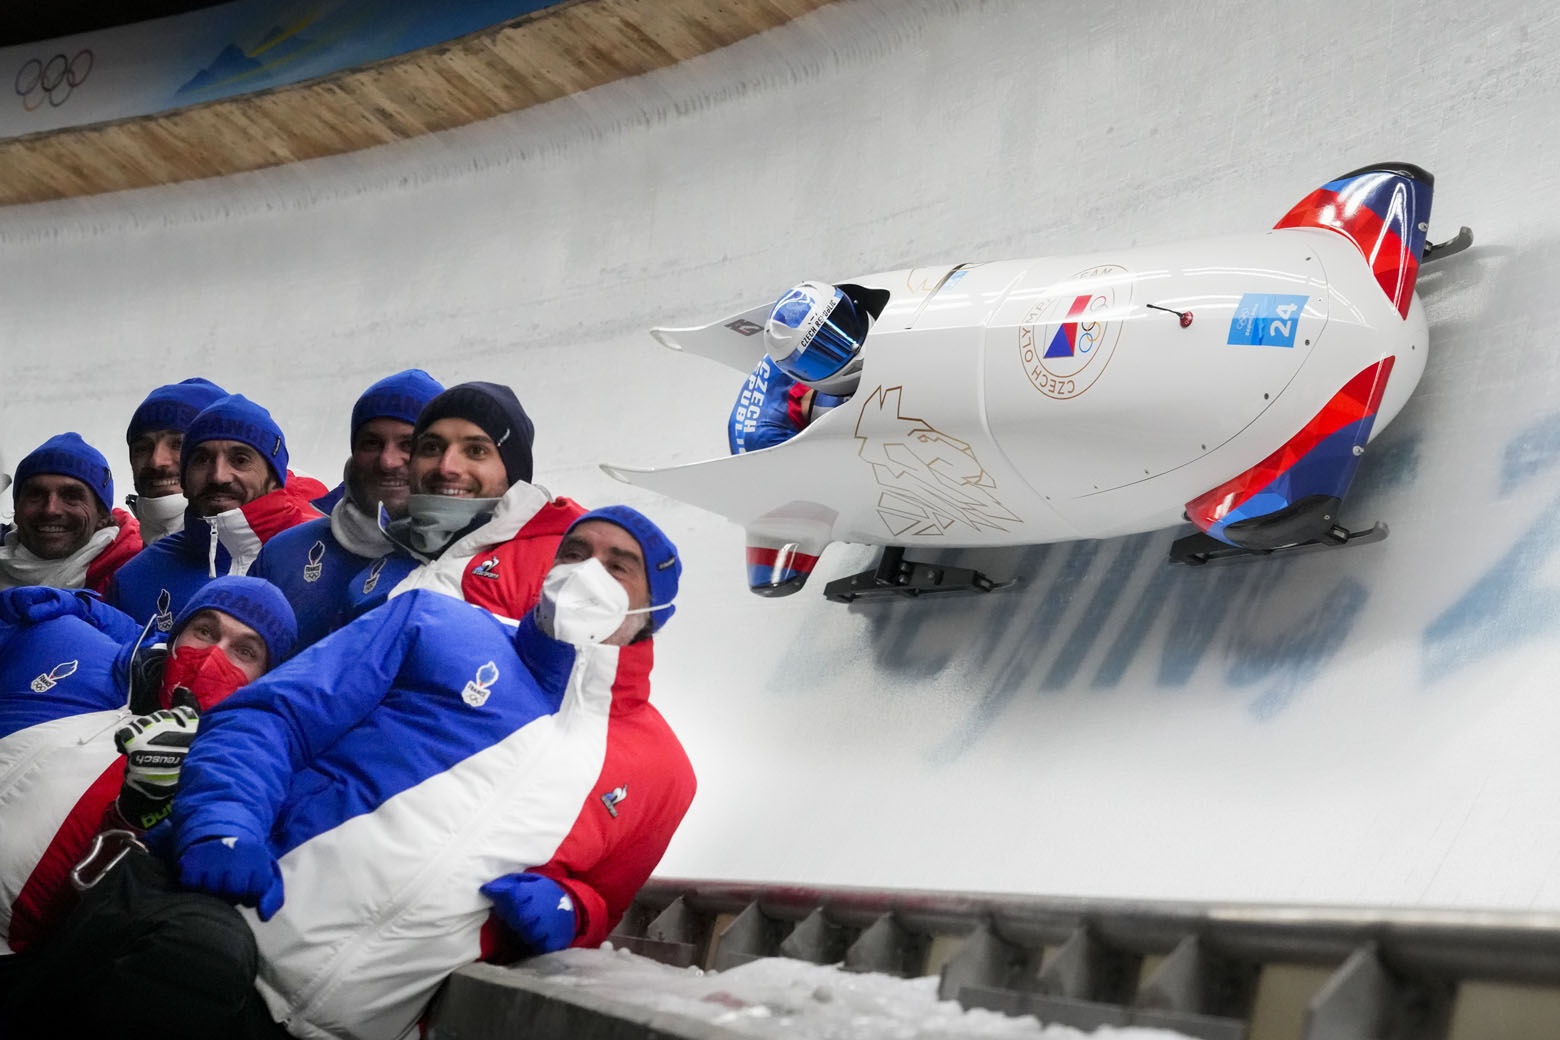 <p>Members of the Czech Republic team pose for a photo as teammates Dominik Dvorak and Jakub Nosek slide past during the 2-man heat 1 at the 2022 Winter Olympics, Monday, Feb. 14, 2022, in the Yanqing district of Beijing.</p>
